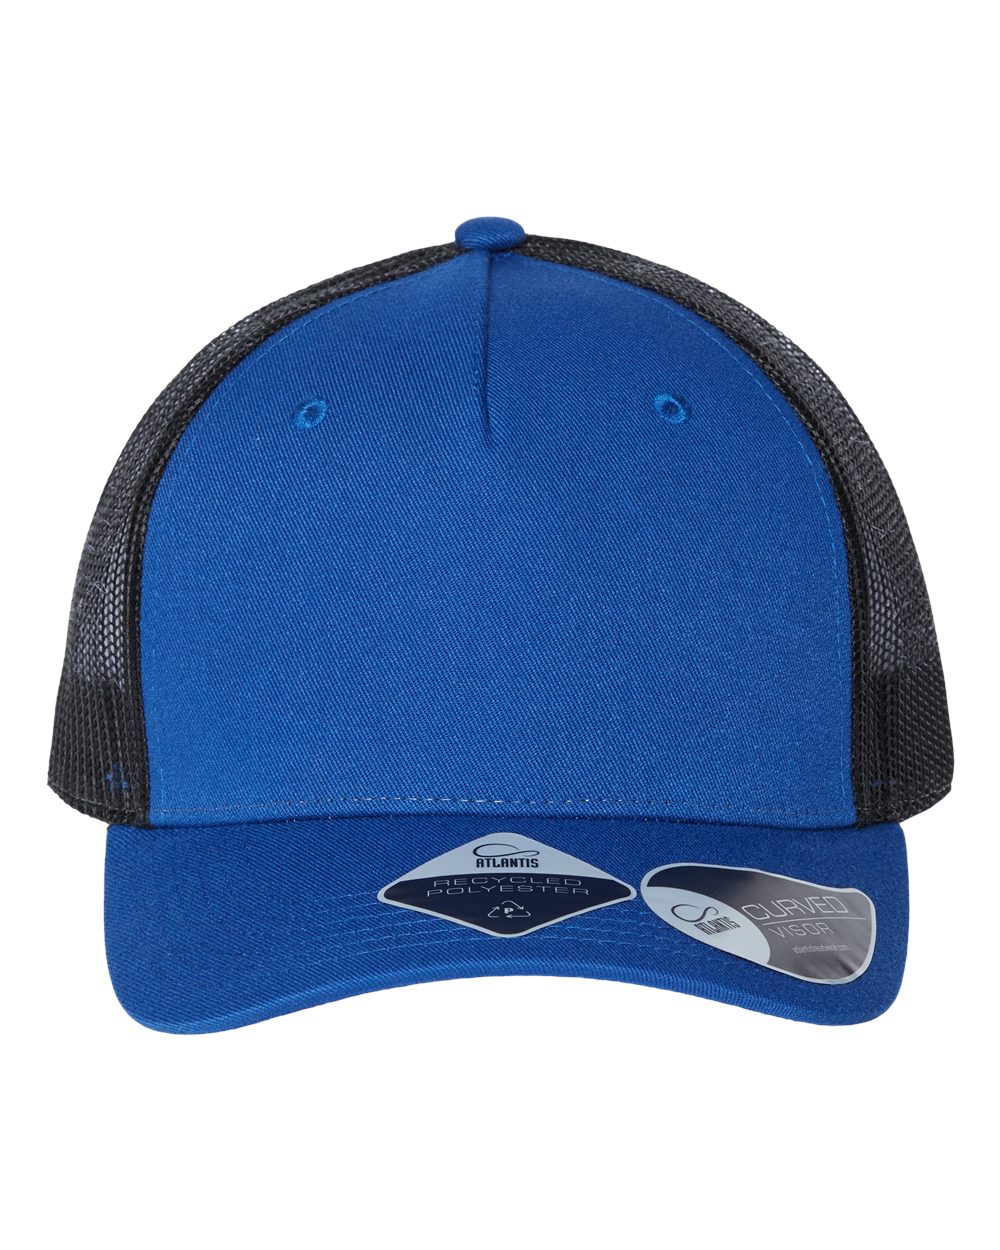 Customizable recycled polyester Atlantis truck hat in royal blue